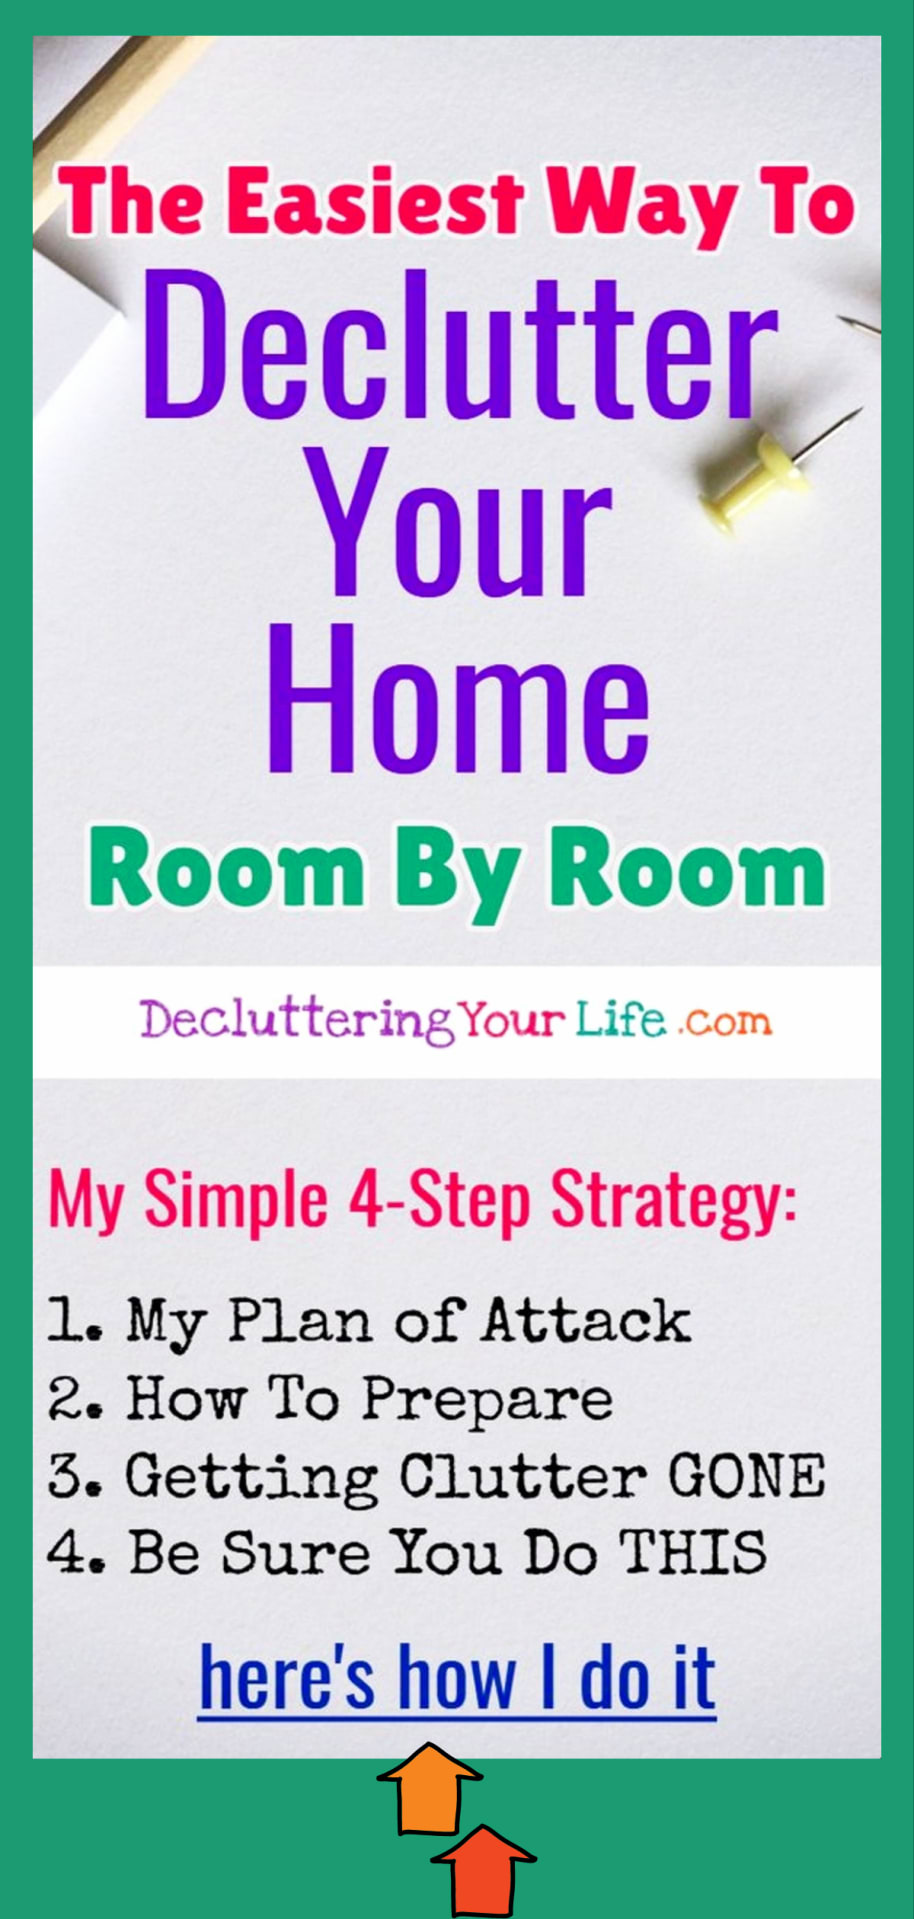 Declutter your home tips and organizing ideas to declutter your home in 30 days or in a weekend - declutter room by room checklist and life changing decluttering tips to declutter and organize when feeling overwhelmed